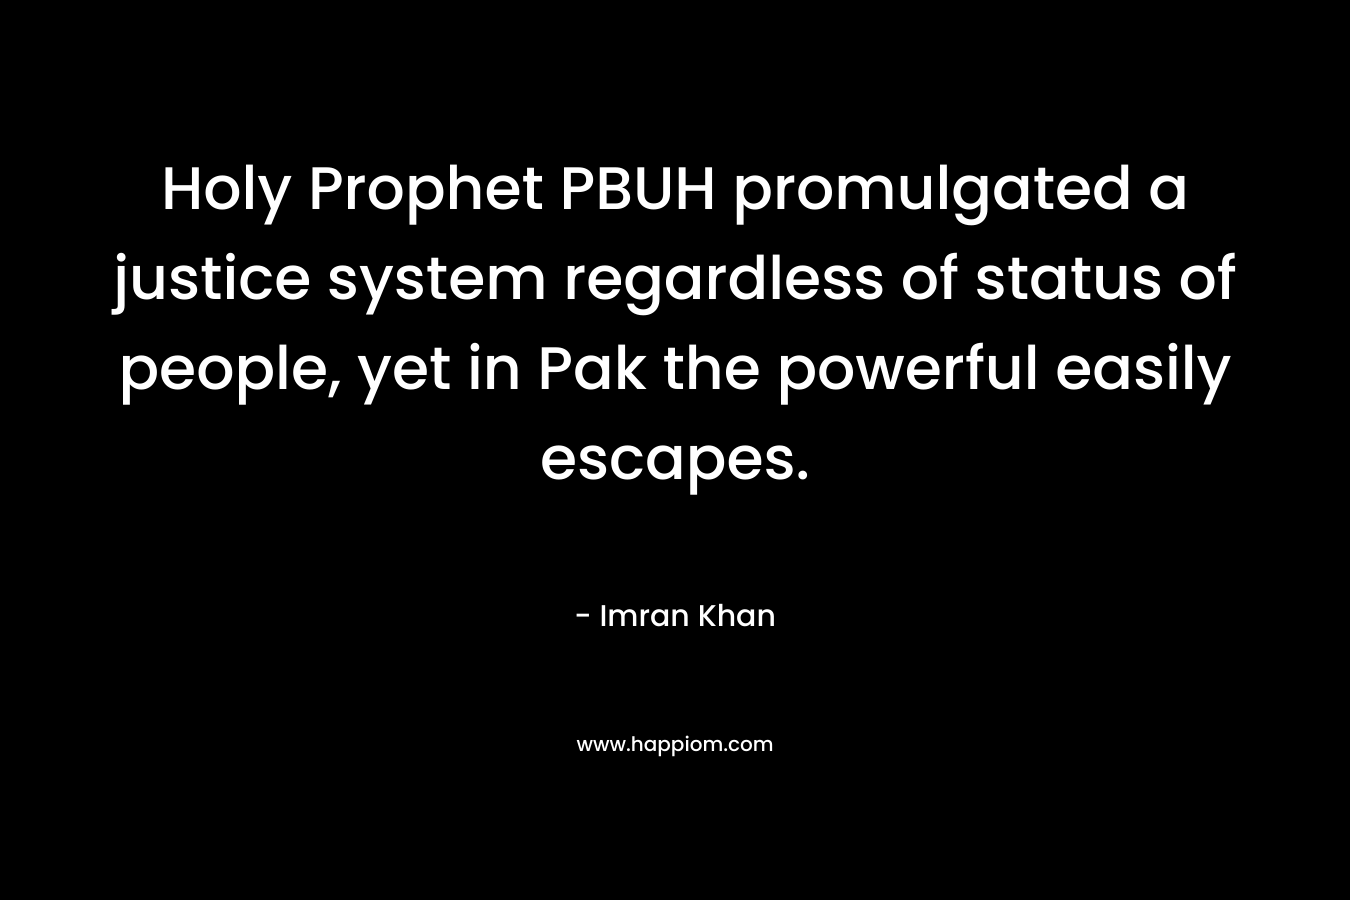 Holy Prophet PBUH promulgated a justice system regardless of status of people, yet in Pak the powerful easily escapes. – Imran Khan